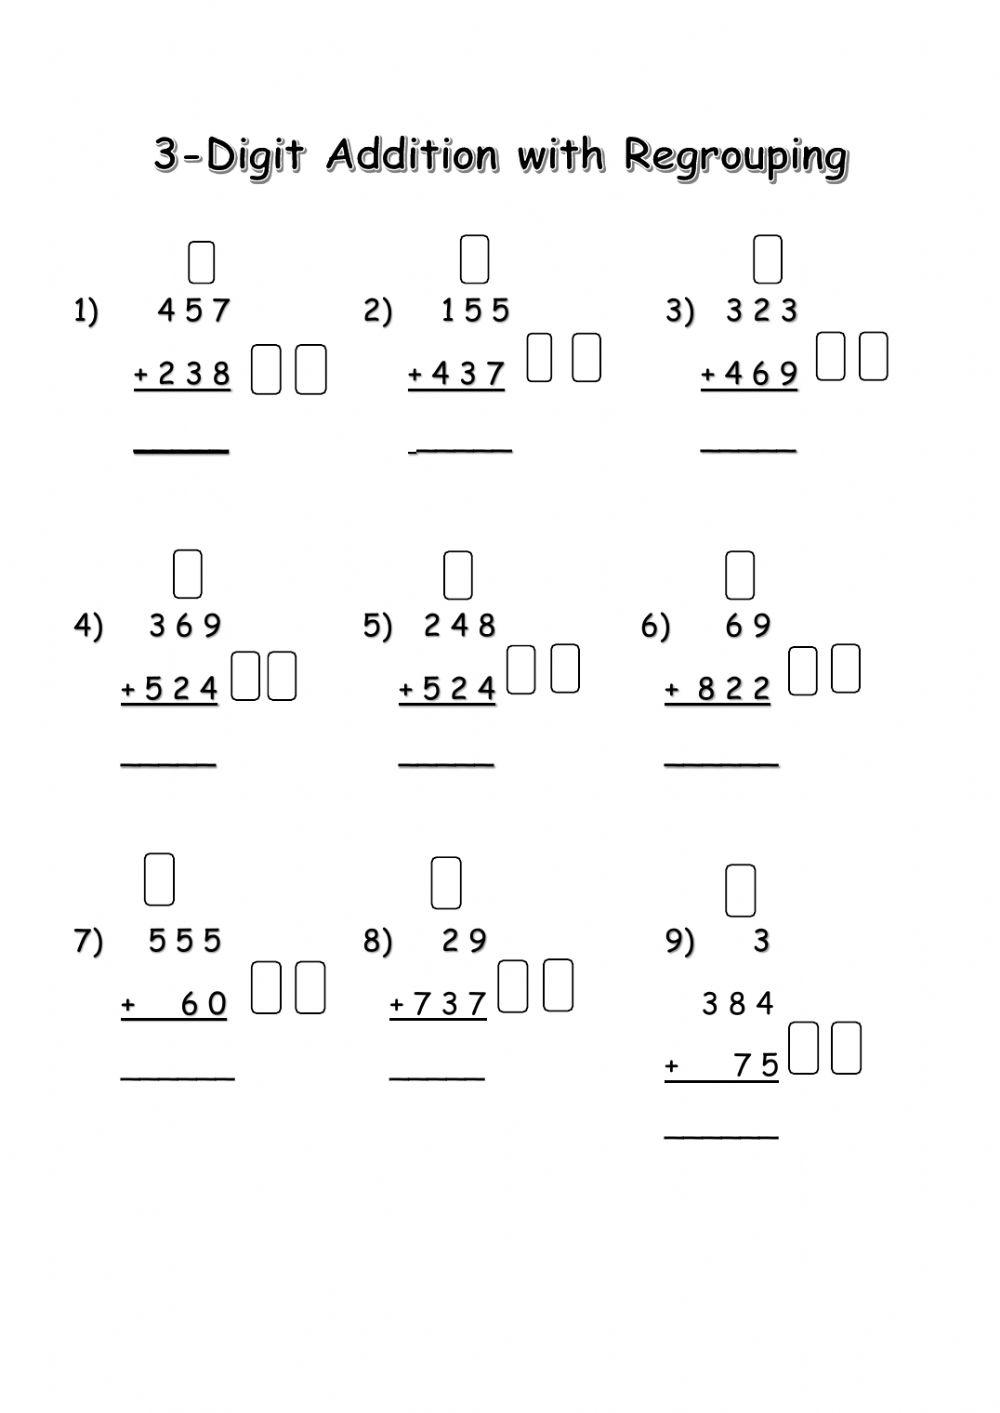 3-digit Addition with Regrouping